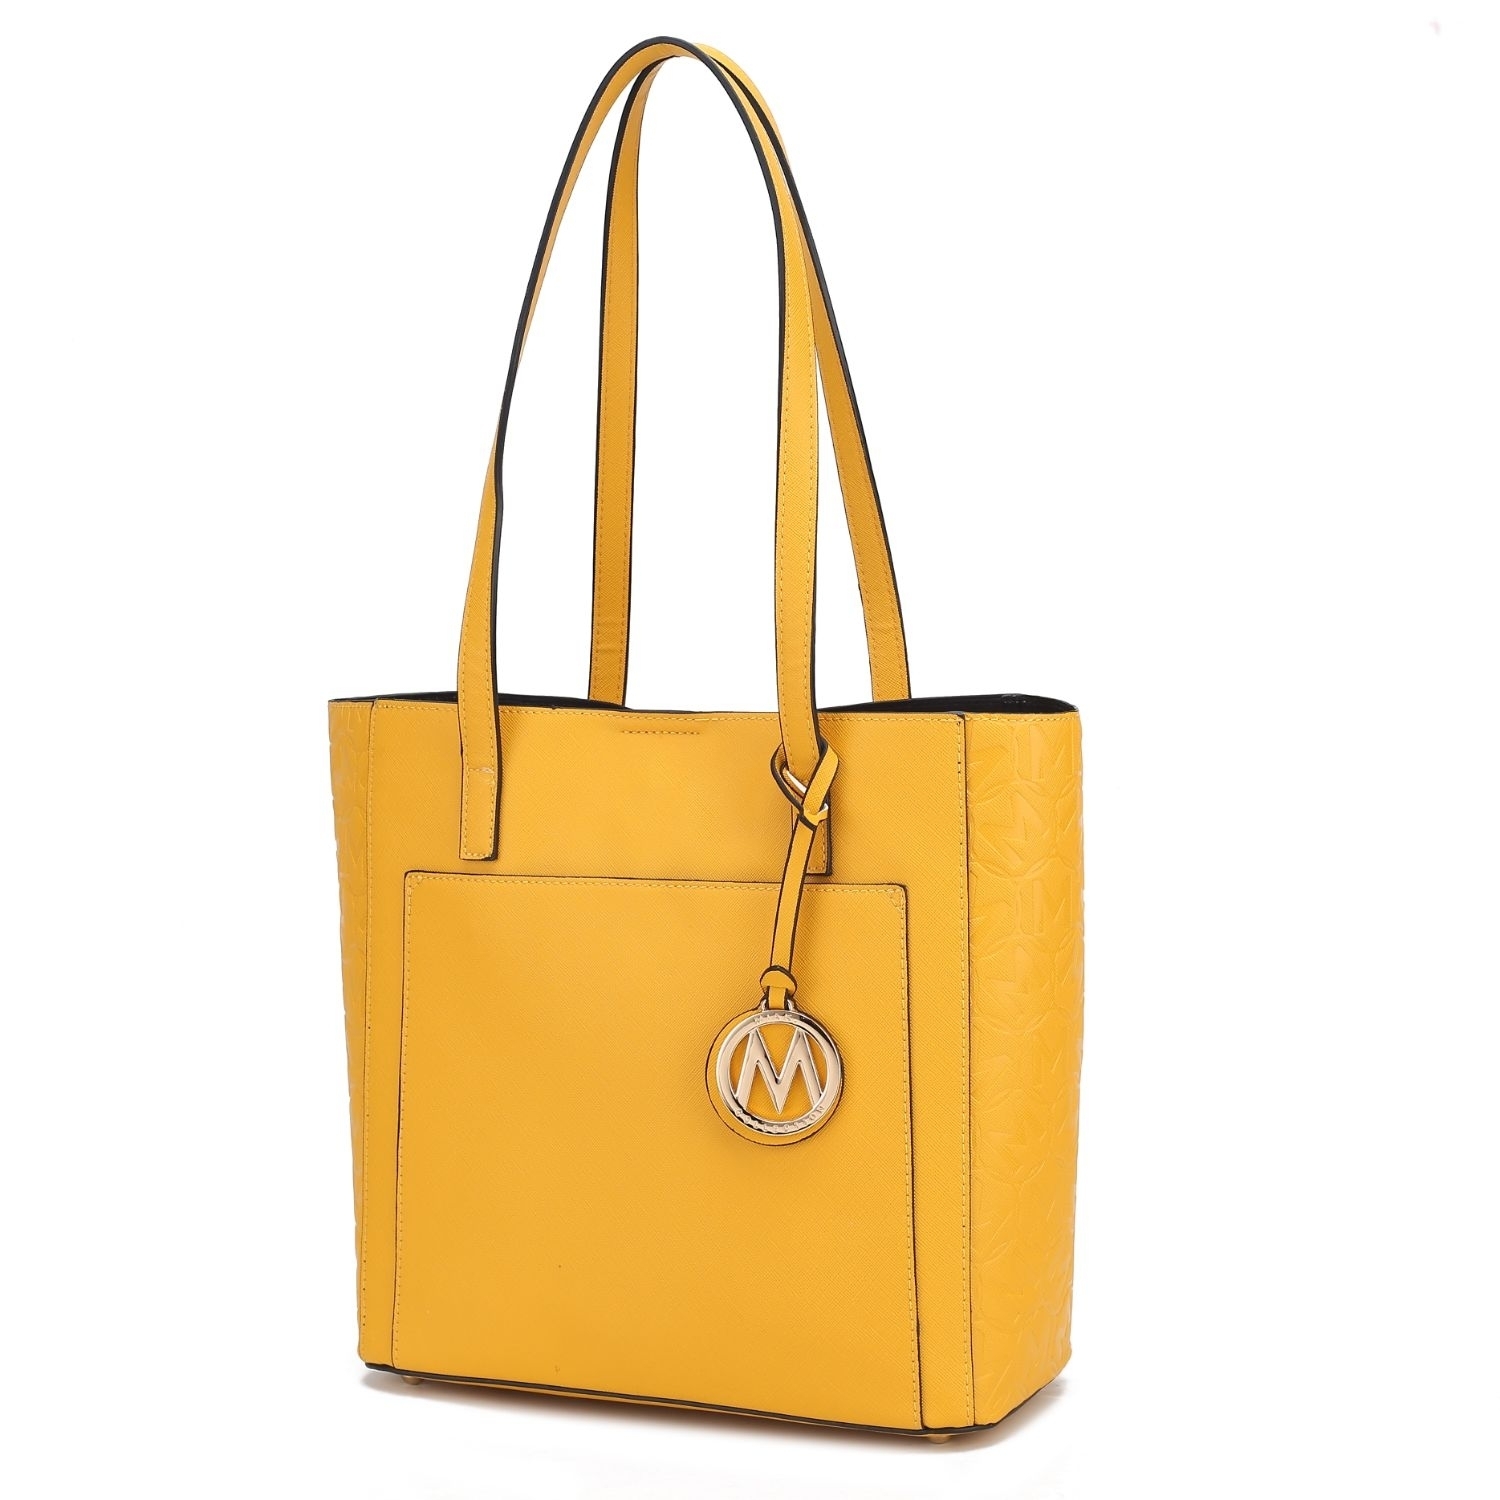 MKF Collection Lea Vegan Leather Women’s Tote Bag By Mia K. - Mustard